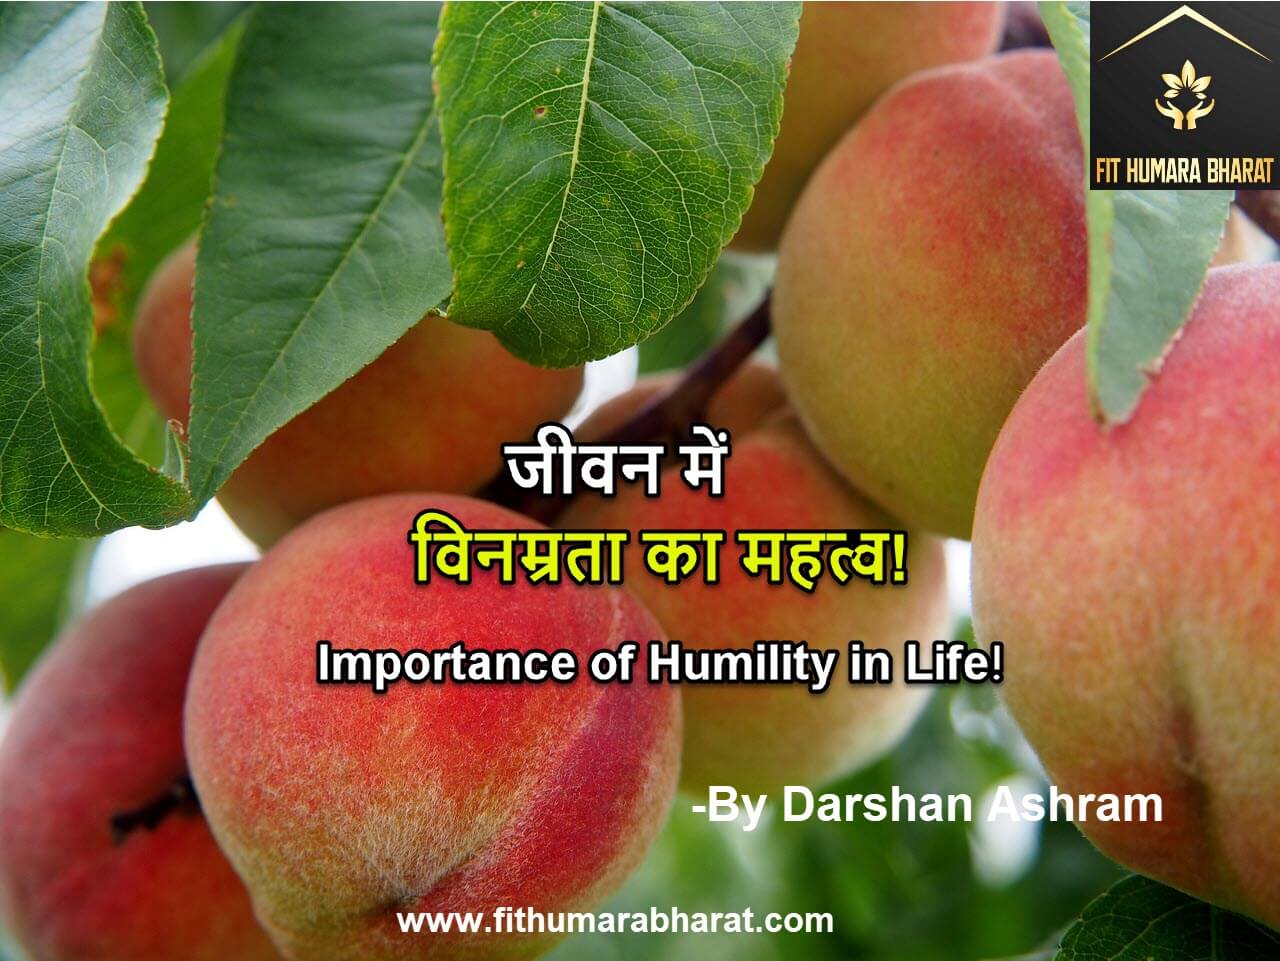 Importance of Humility